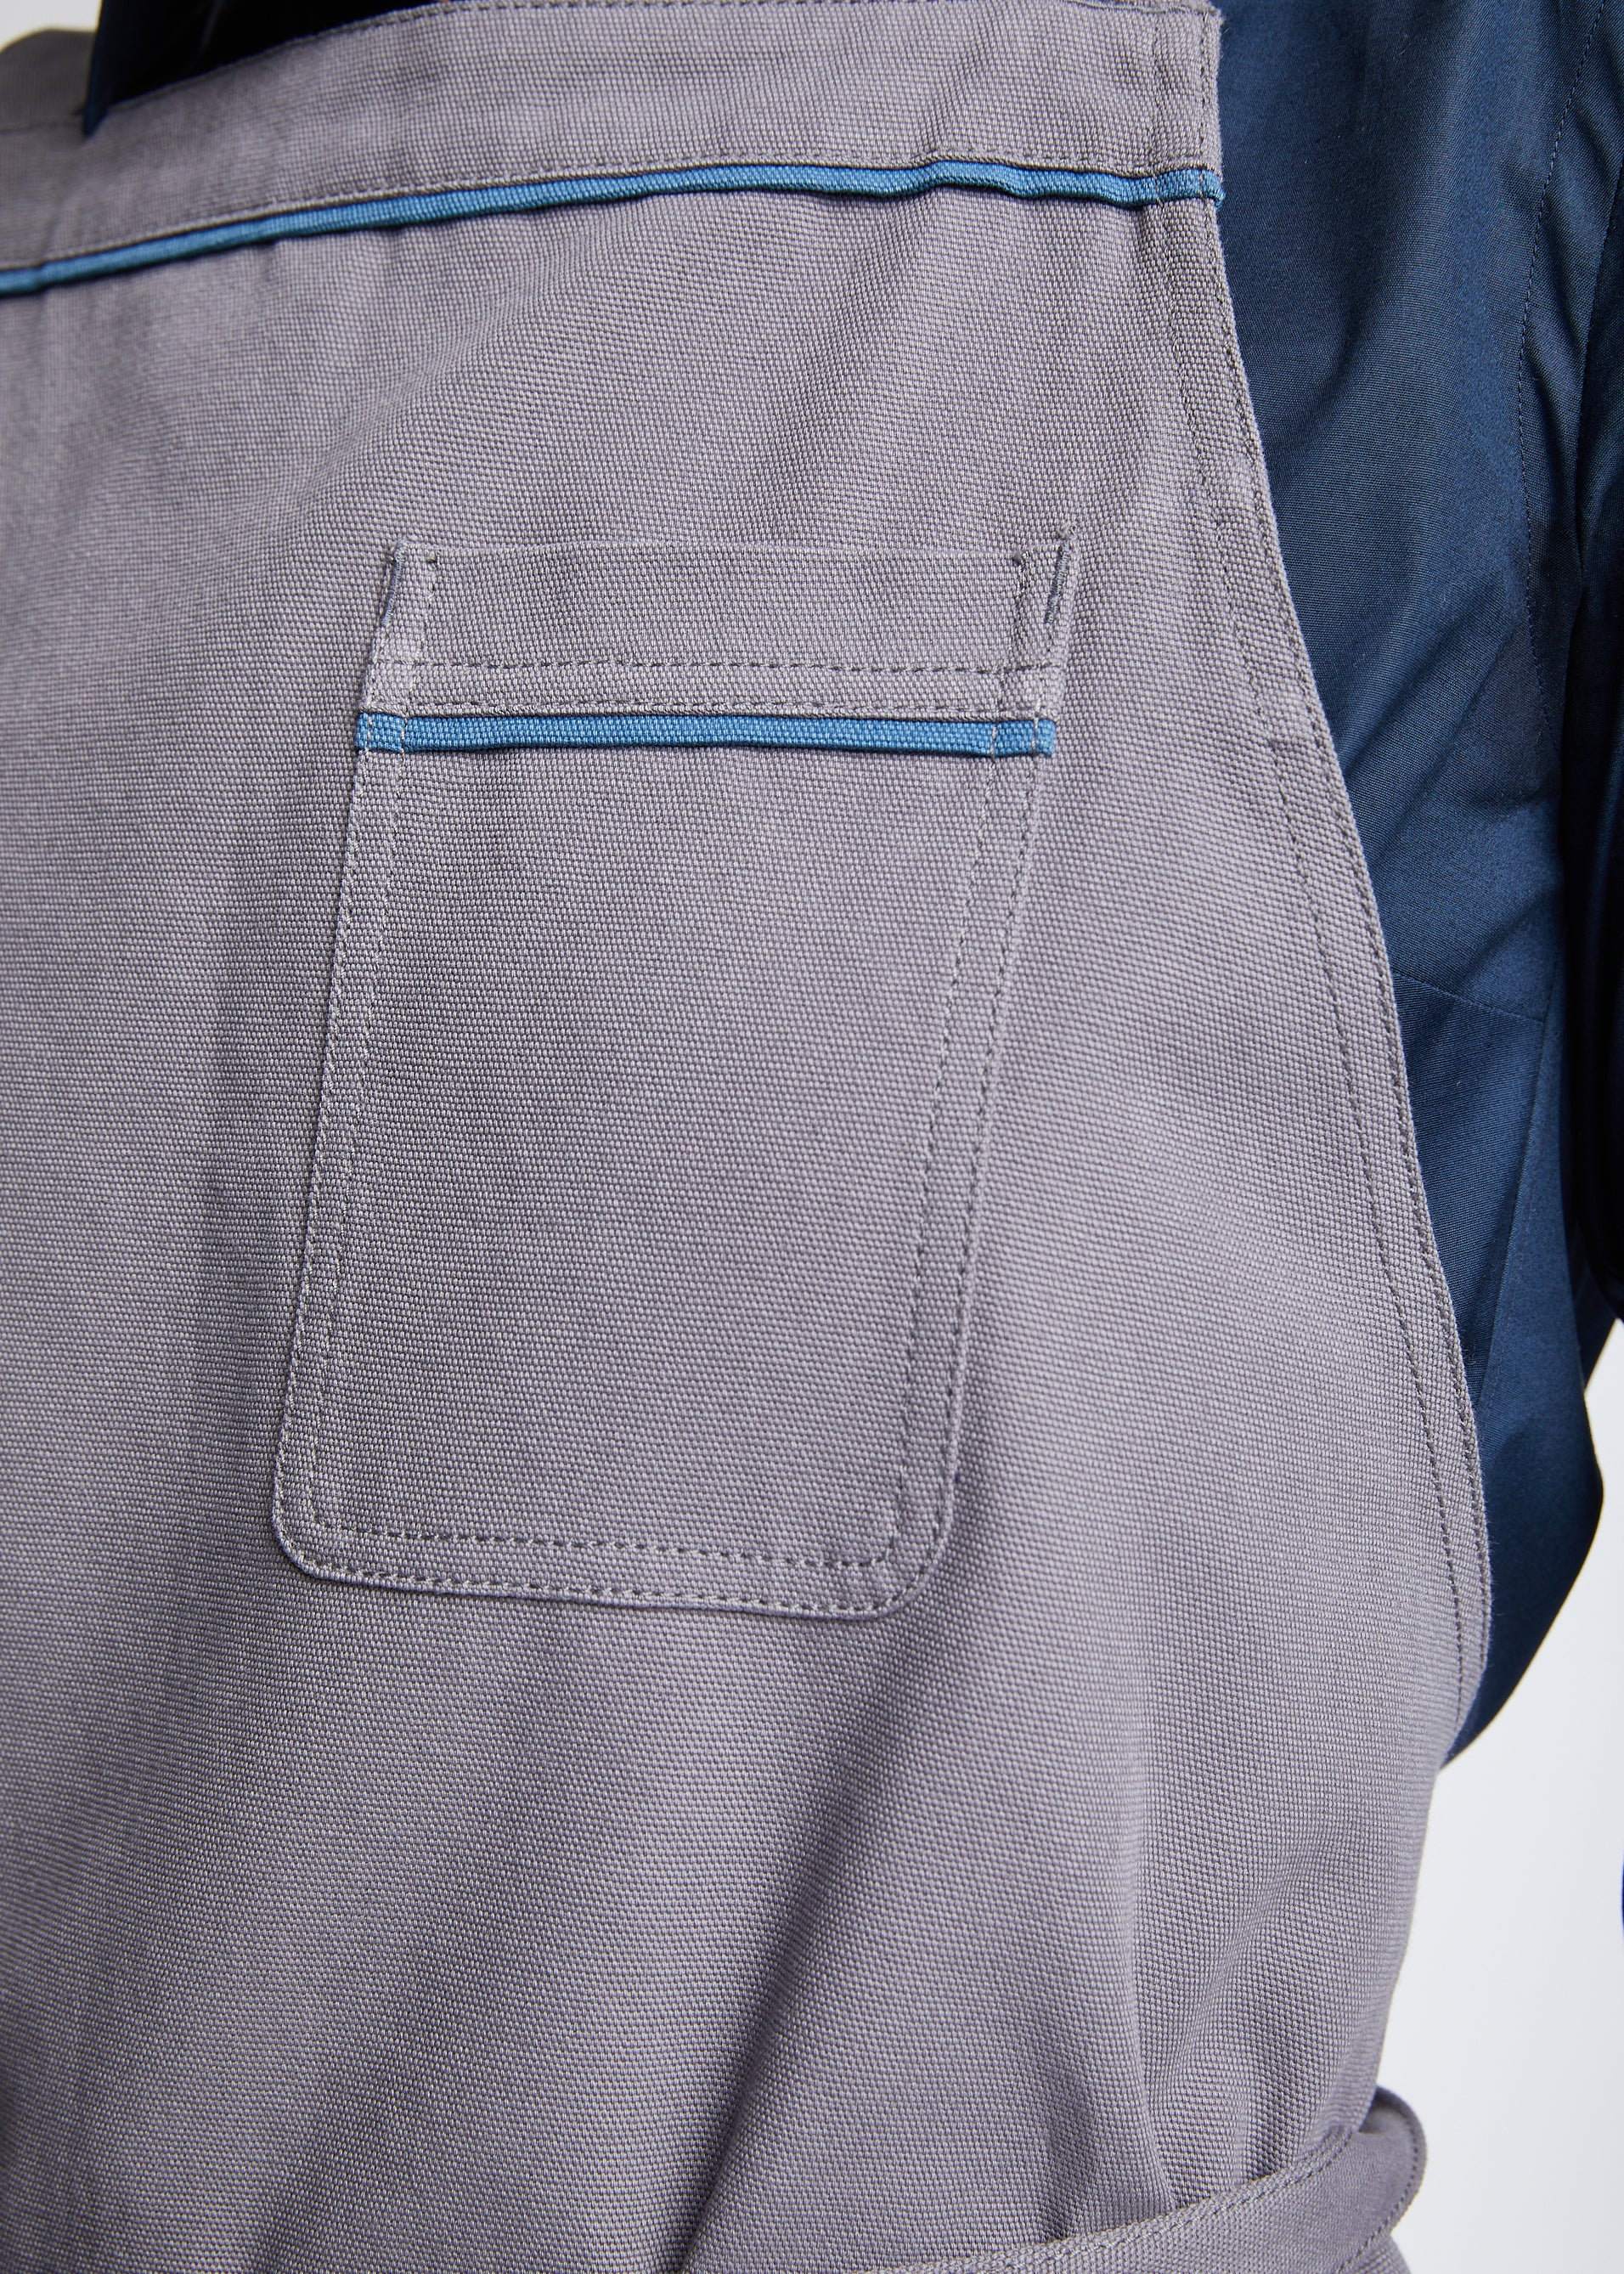 Austin Canvas Cross-Back Apron in Light Gray with Slate Blue Piping